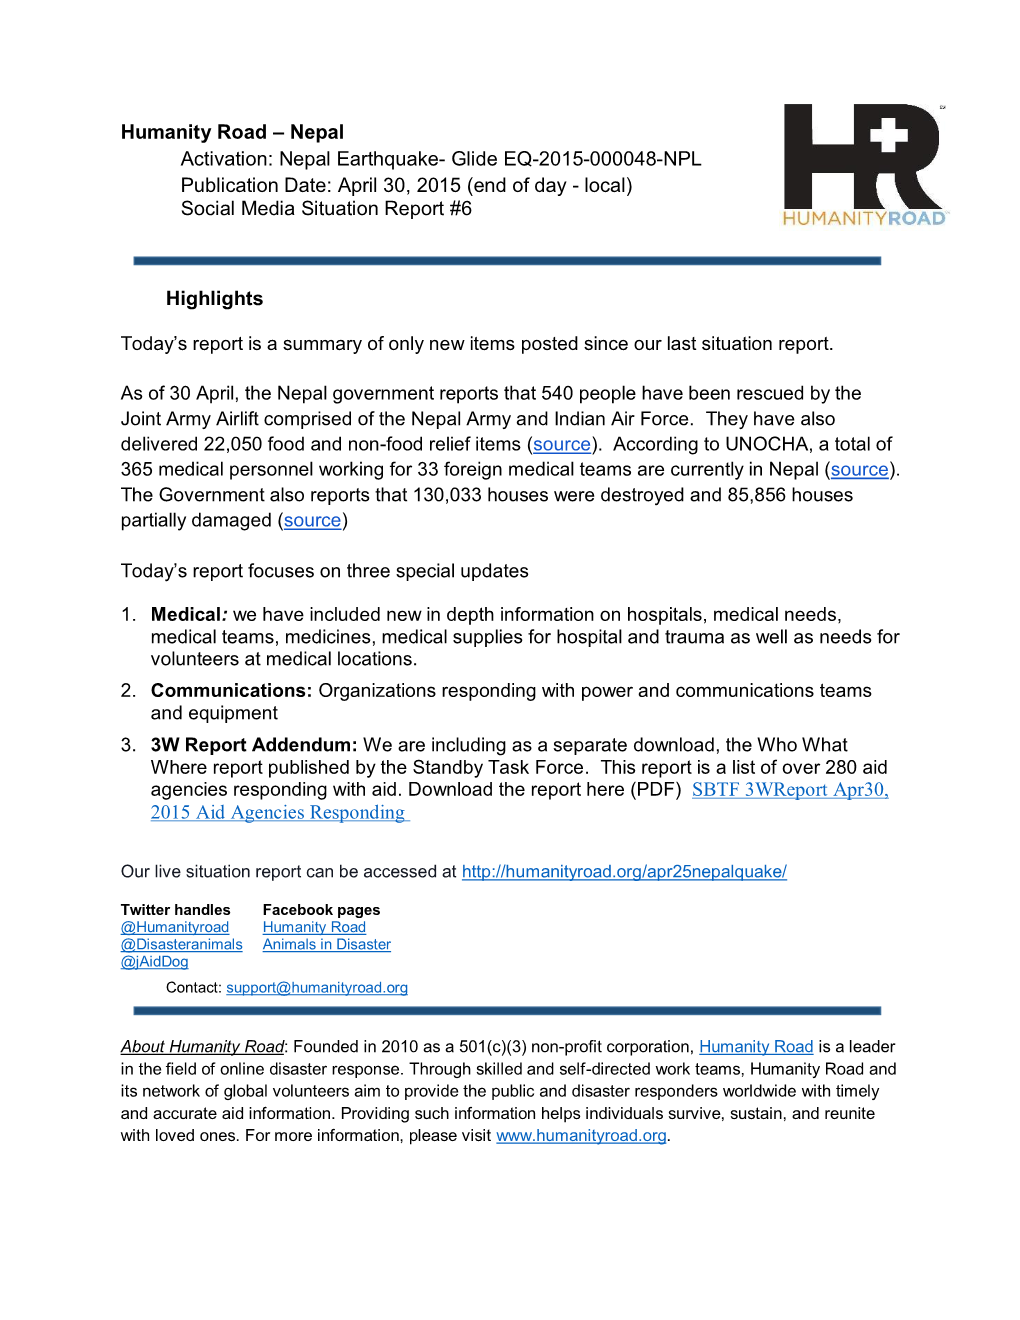 Humanity Road – Nepal Activation: Nepal Earthquake- Glide EQ-2015-000048-NPL Publication Date: April 30, 2015 (End of Day - Local) Social Media Situation Report #6